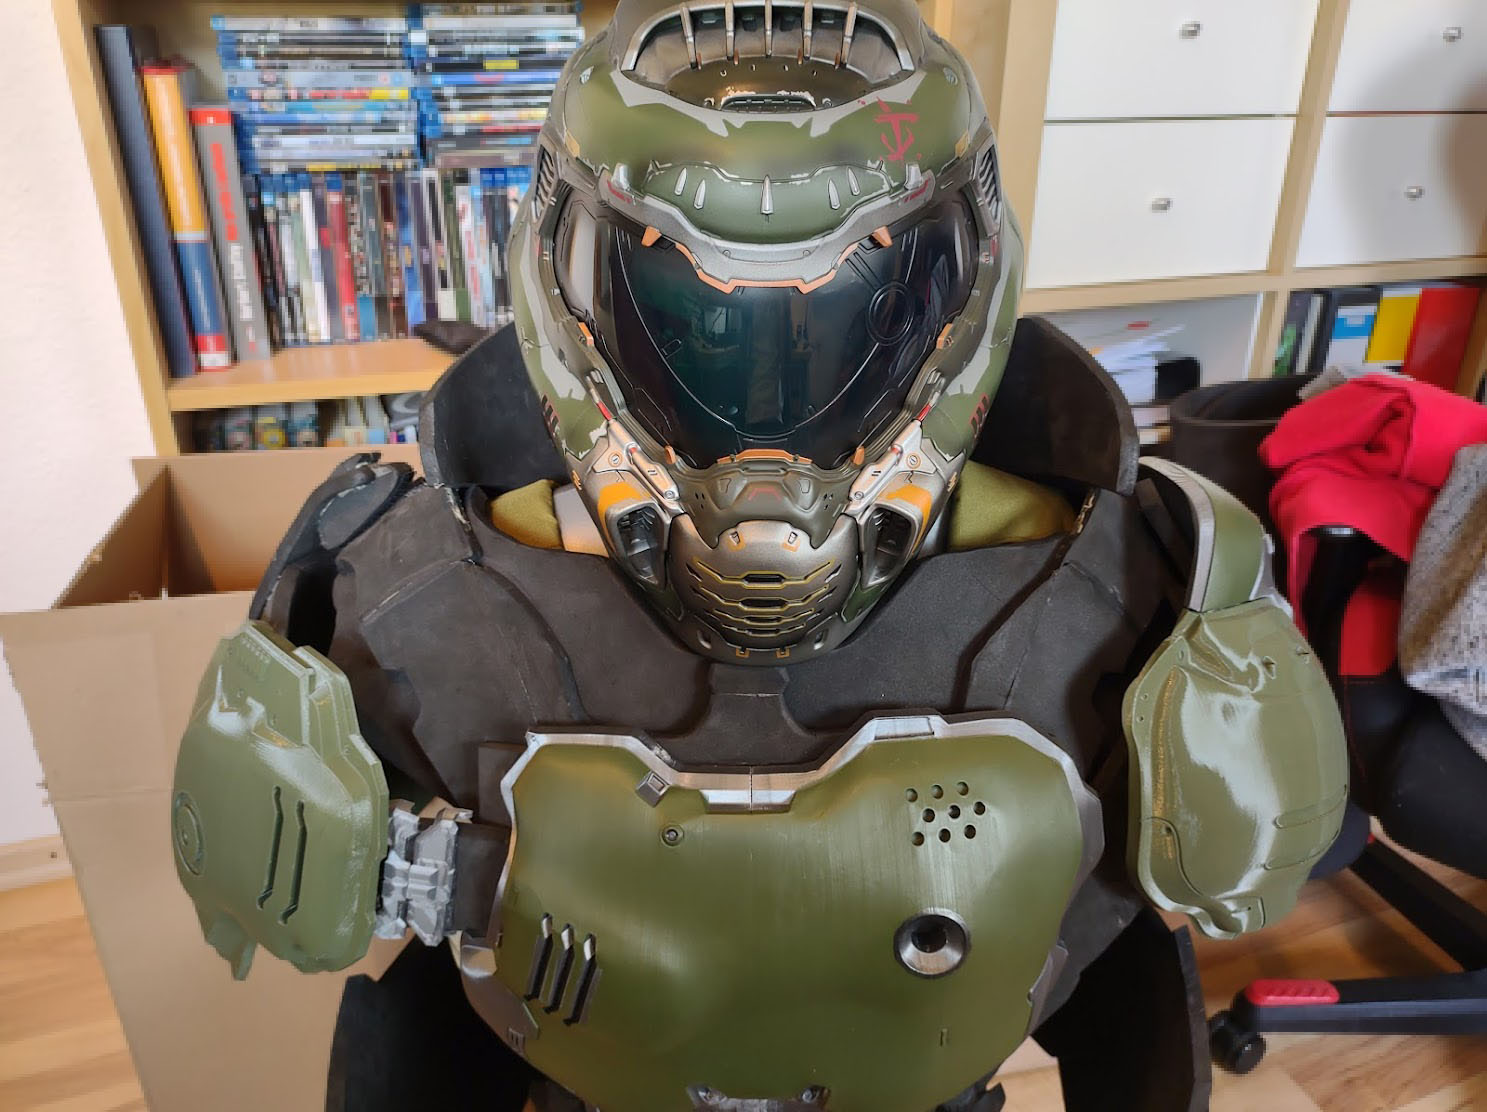 Yet Another Doom Slayer Praetor Suit 2016 Build Halo Costume And Prop Maker Community 405th